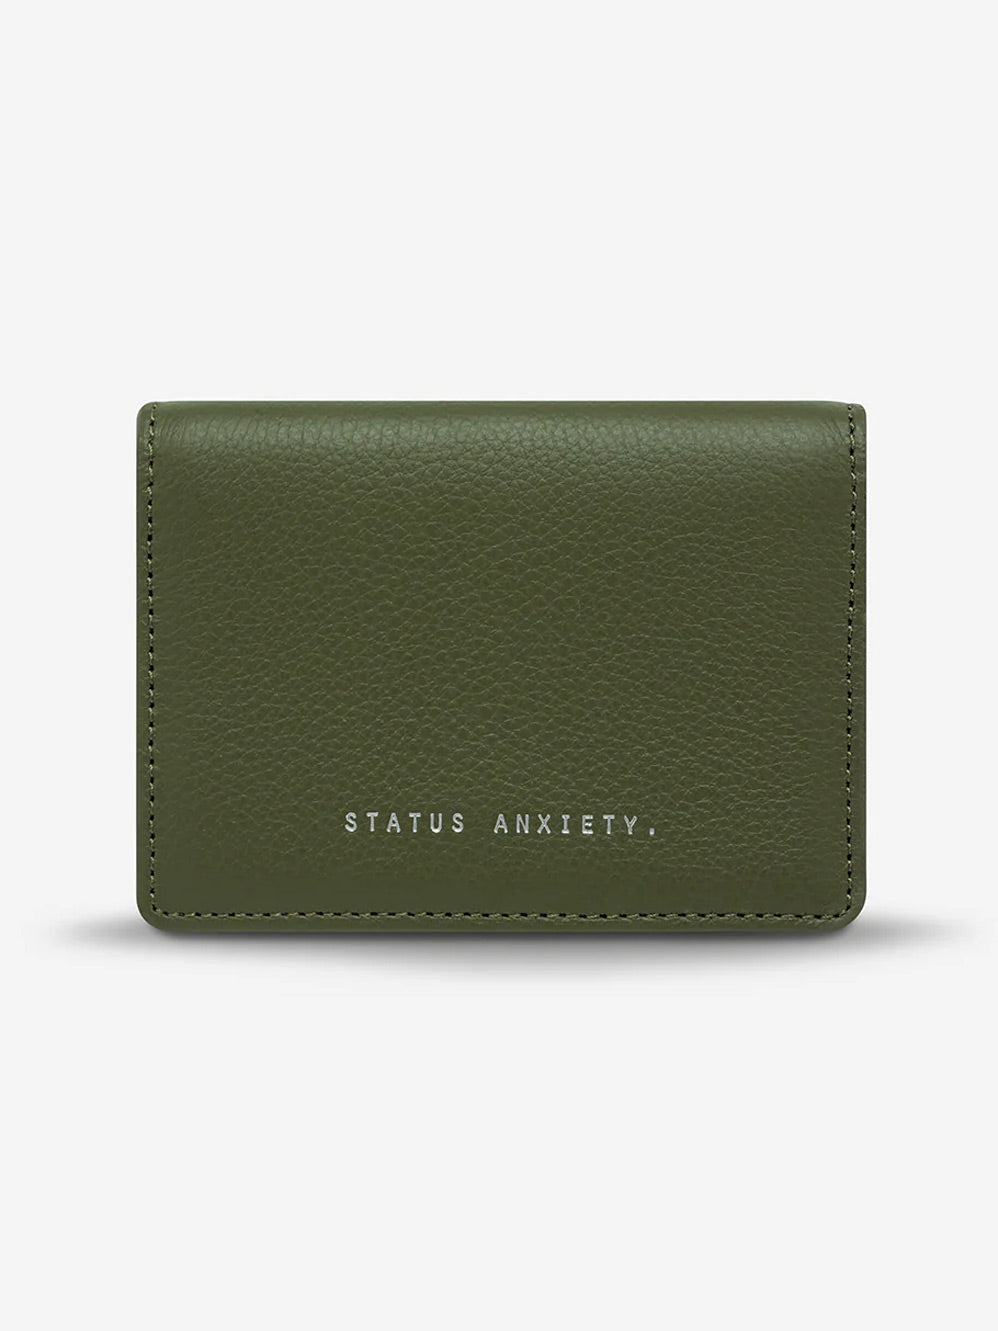 STATUS ANXIETY EASY DOES IT WALLET